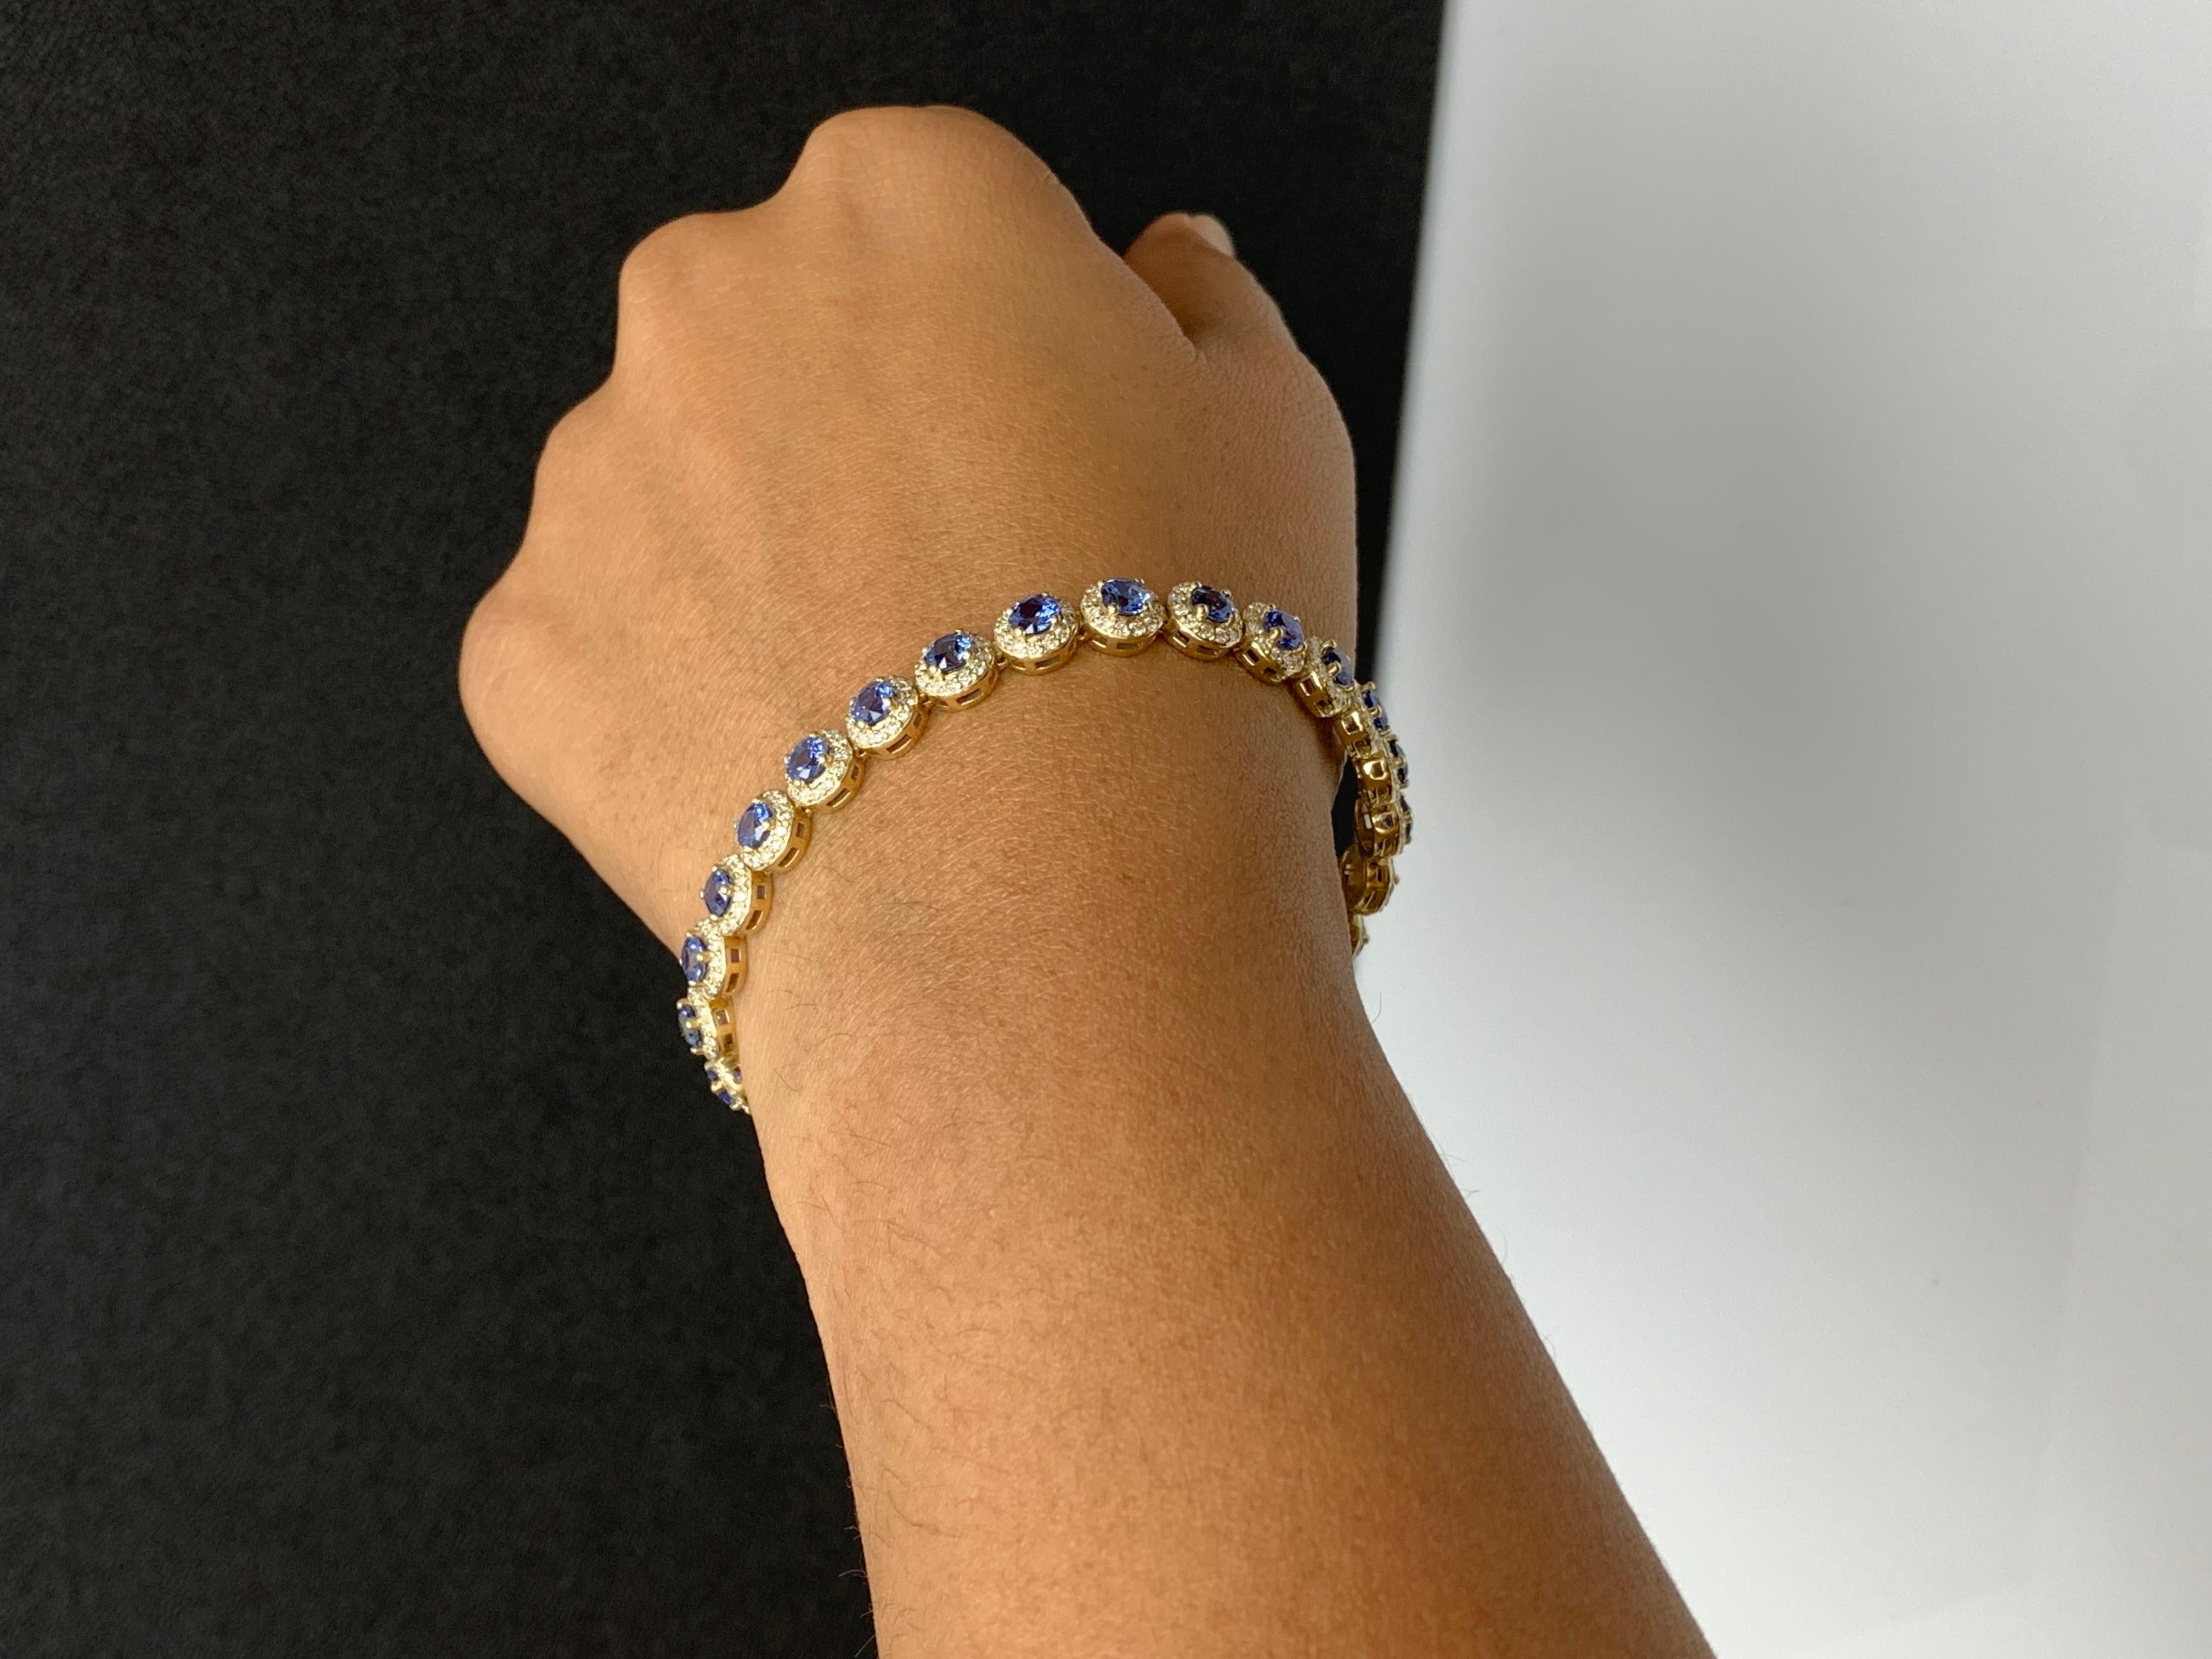 7.47 Carat Blue Sapphire and Diamond Halo Tennis Bracelet in 14k Yellow Gold For Sale 1